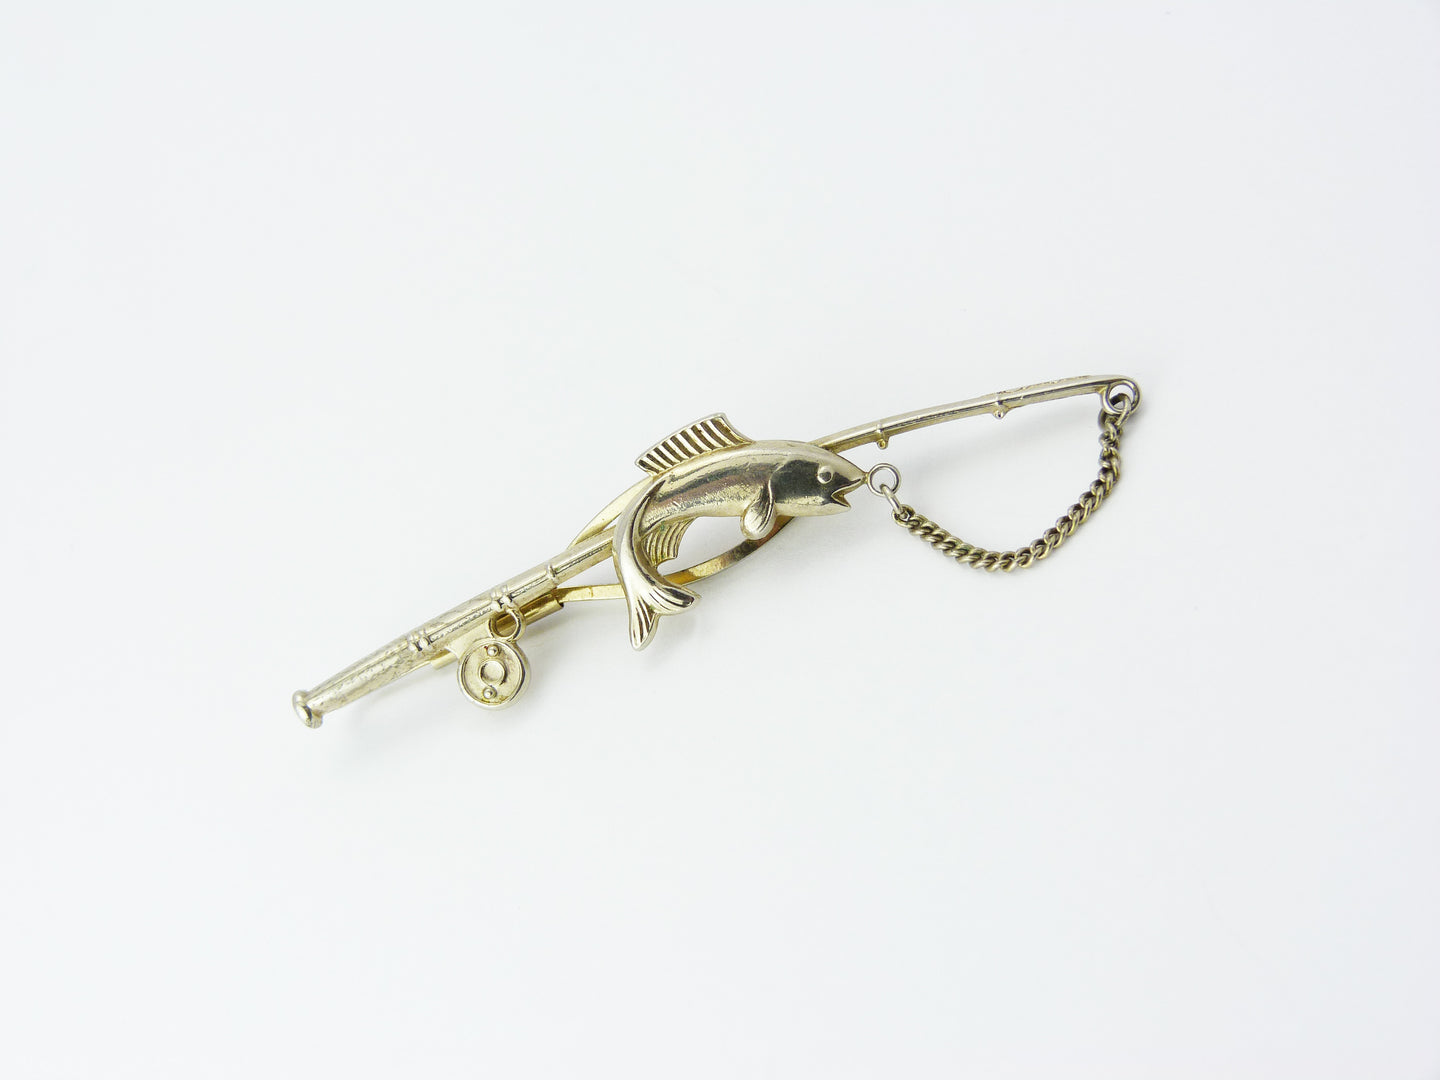 Vintage Stratton Made In England Fishing Rod Tie Clip – HEATON HOUSE